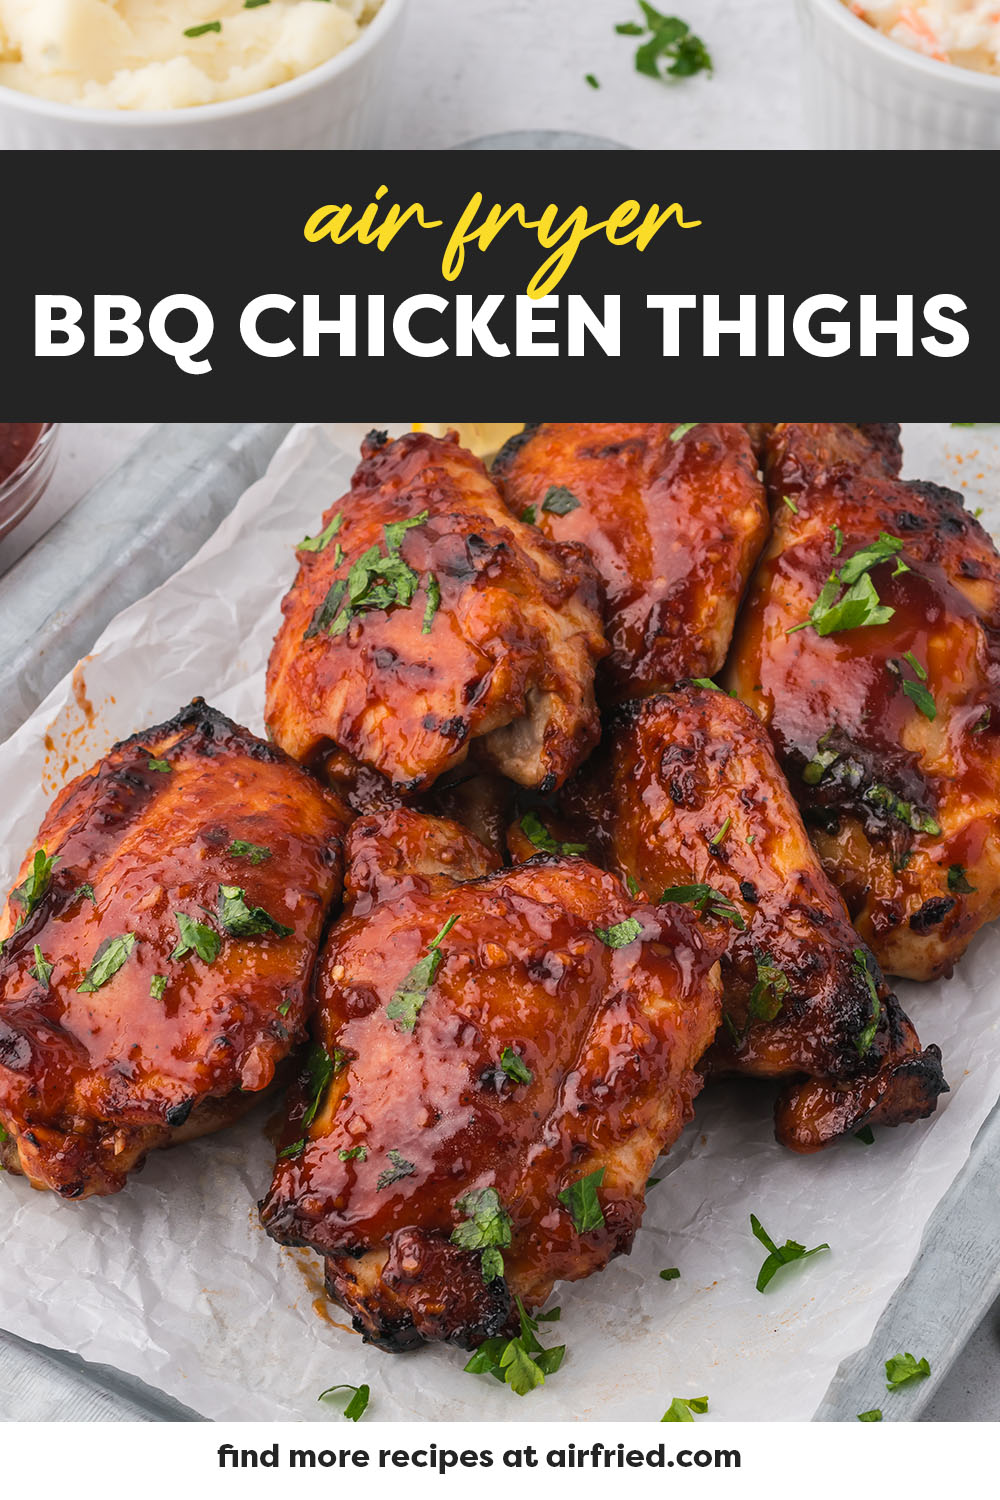 Several BBQ chicken thighs on a baking sheet.